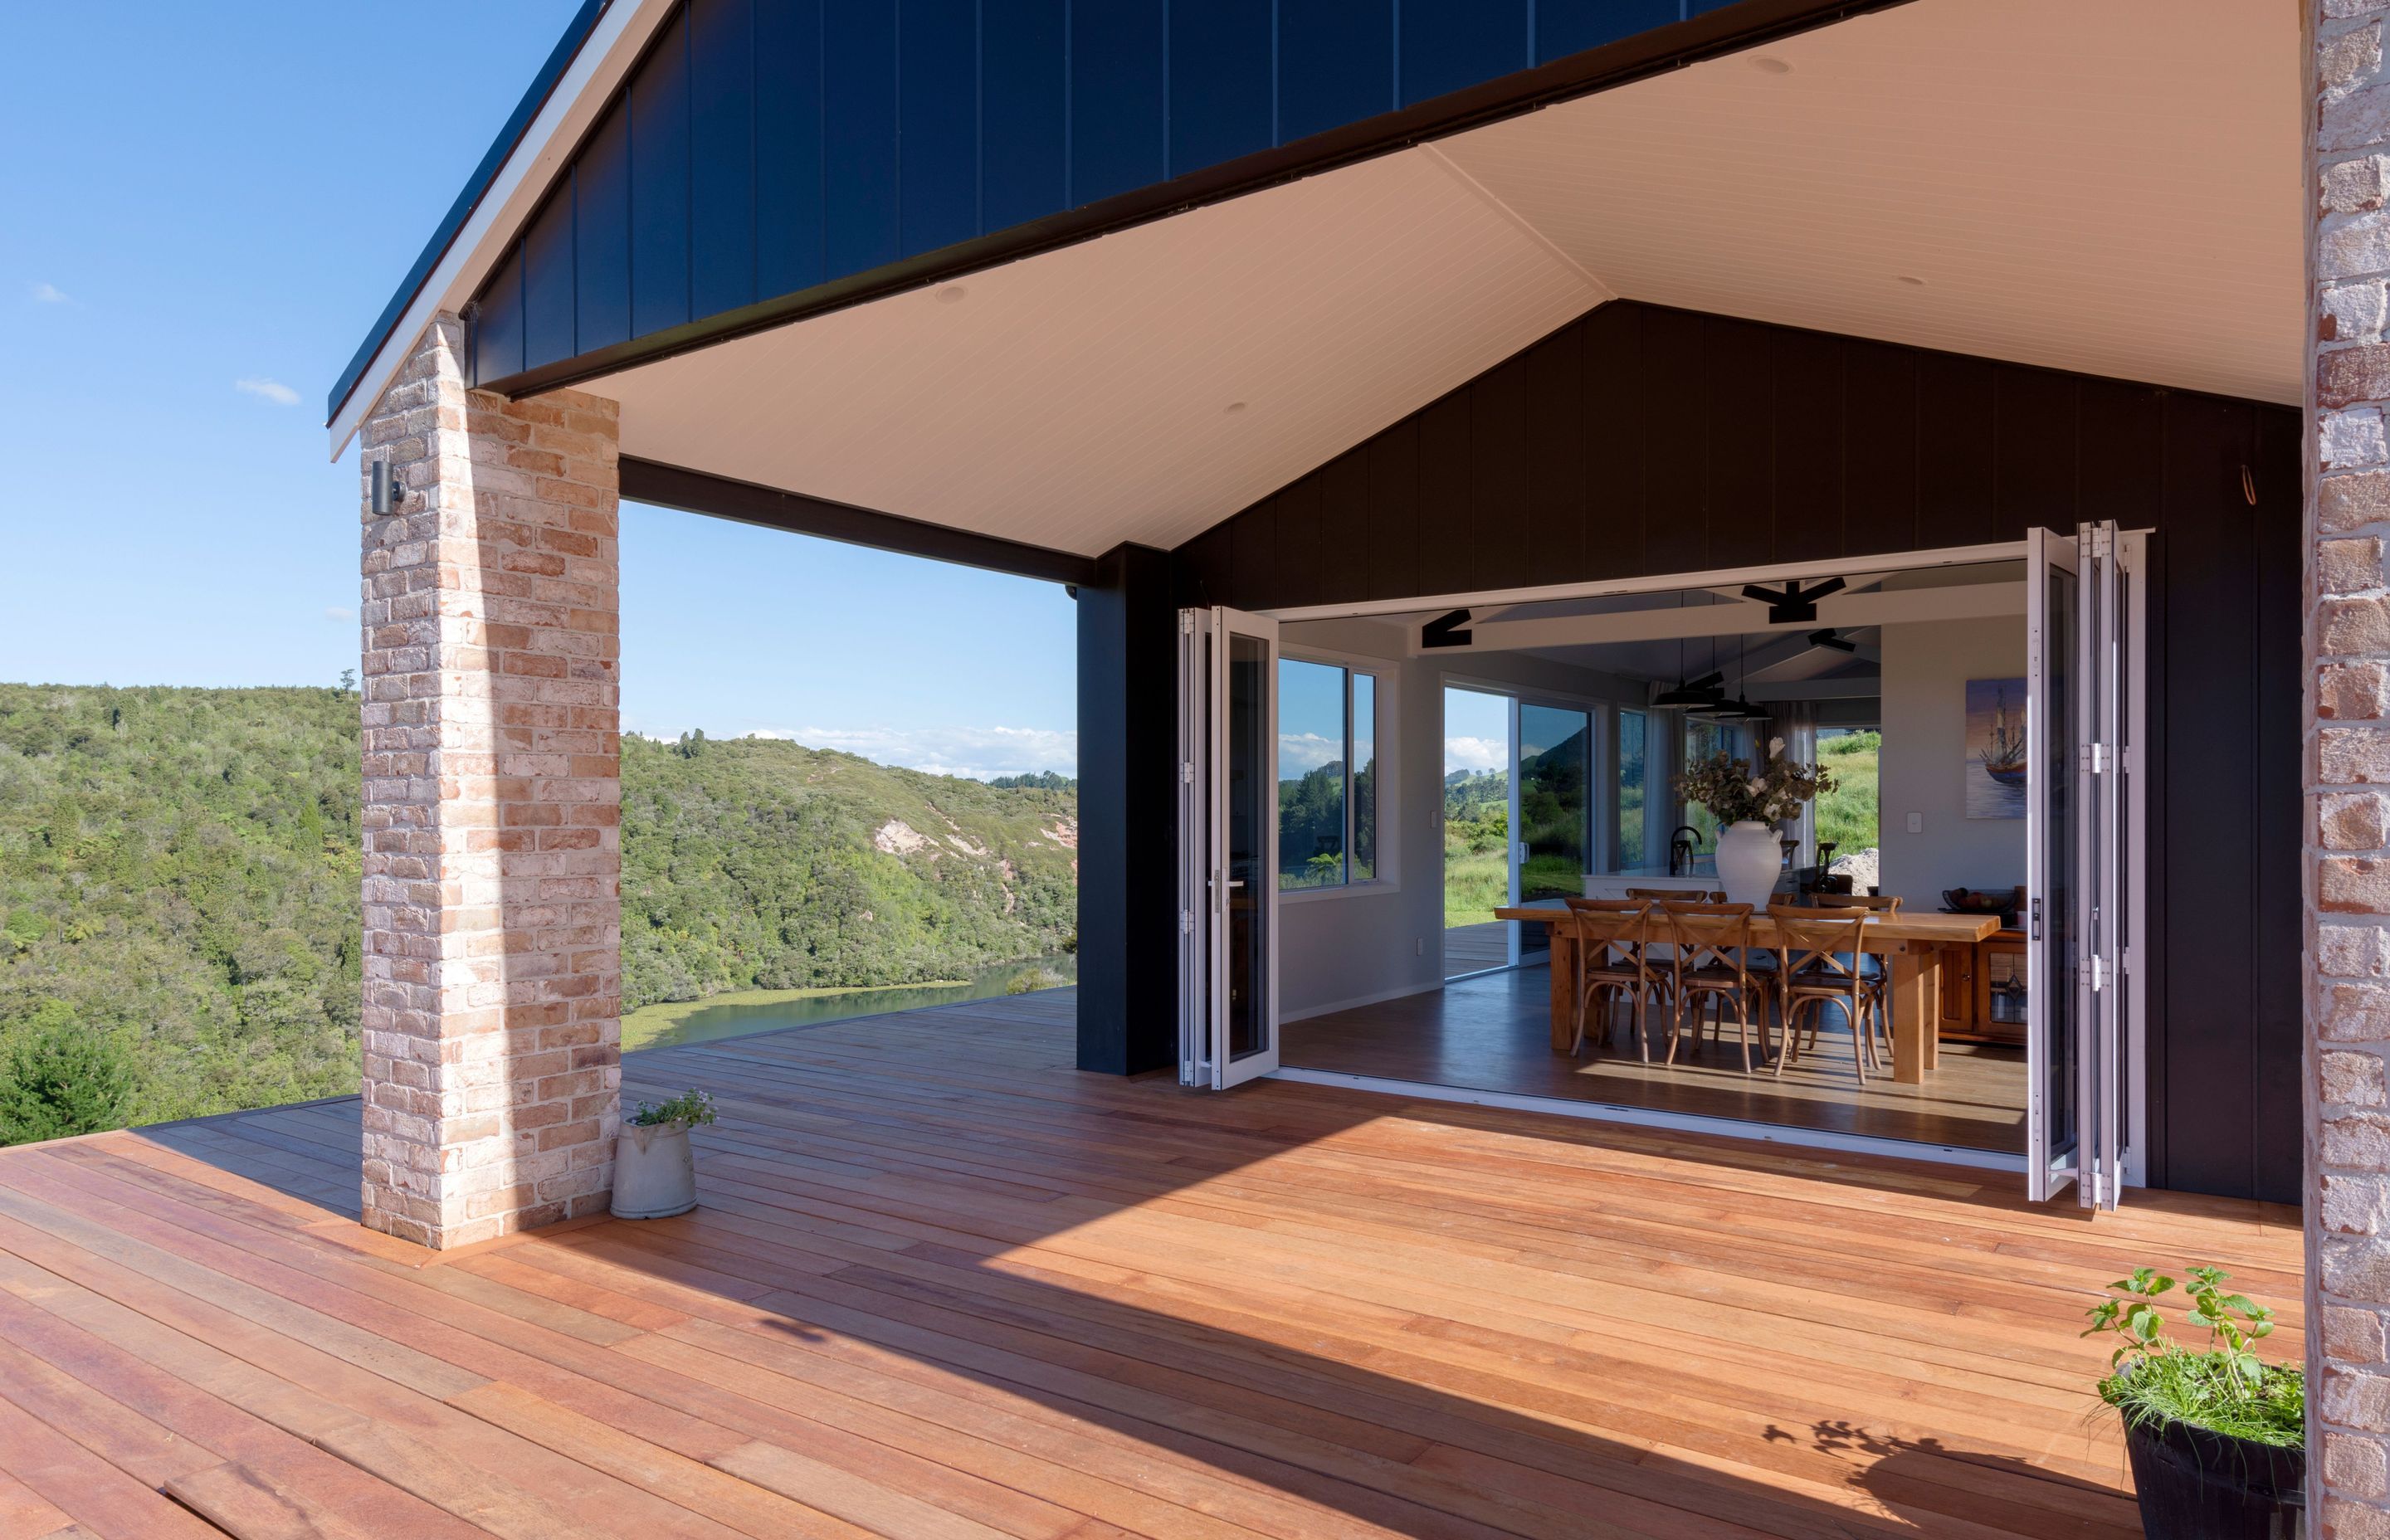 Kwila decking, accessed seamlessly through bi-fold doors, was the last to be finished and there are plans for outdoor furniture to make the most of it.